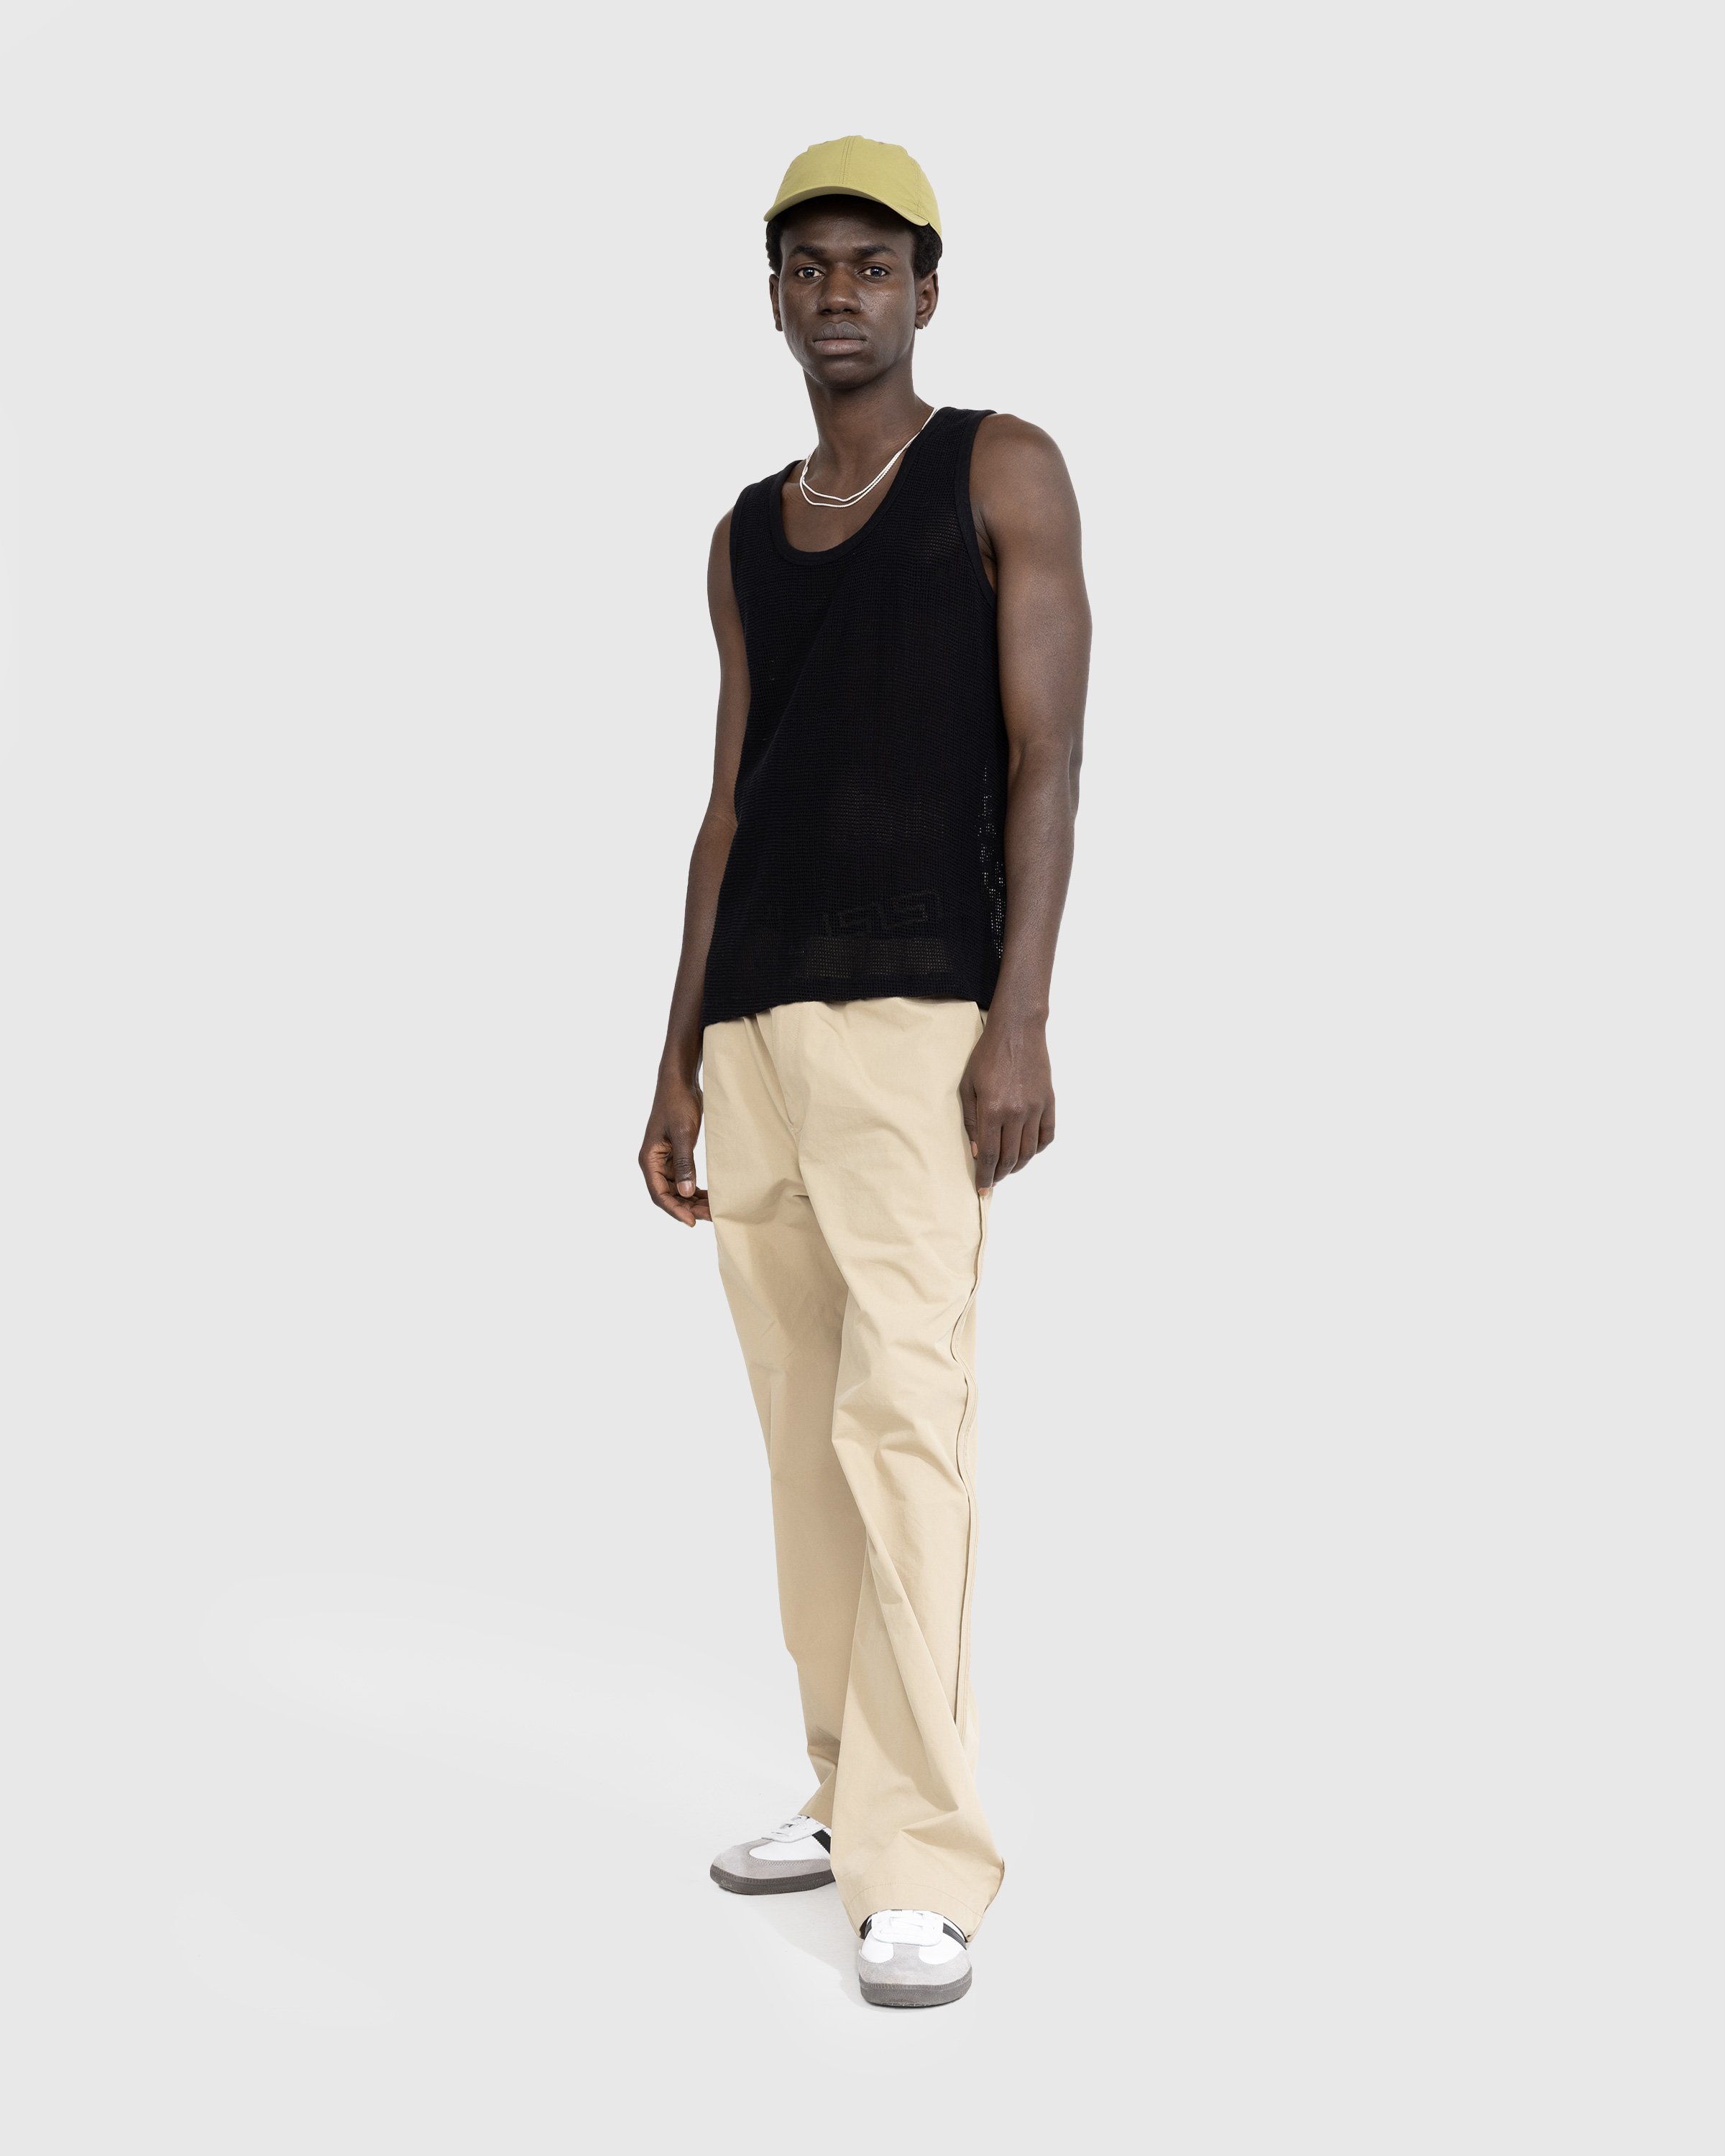 Highsnobiety HS05 - Pigment Dyed Cotton Mesh Tank Top Black - Clothing -  - Image 5